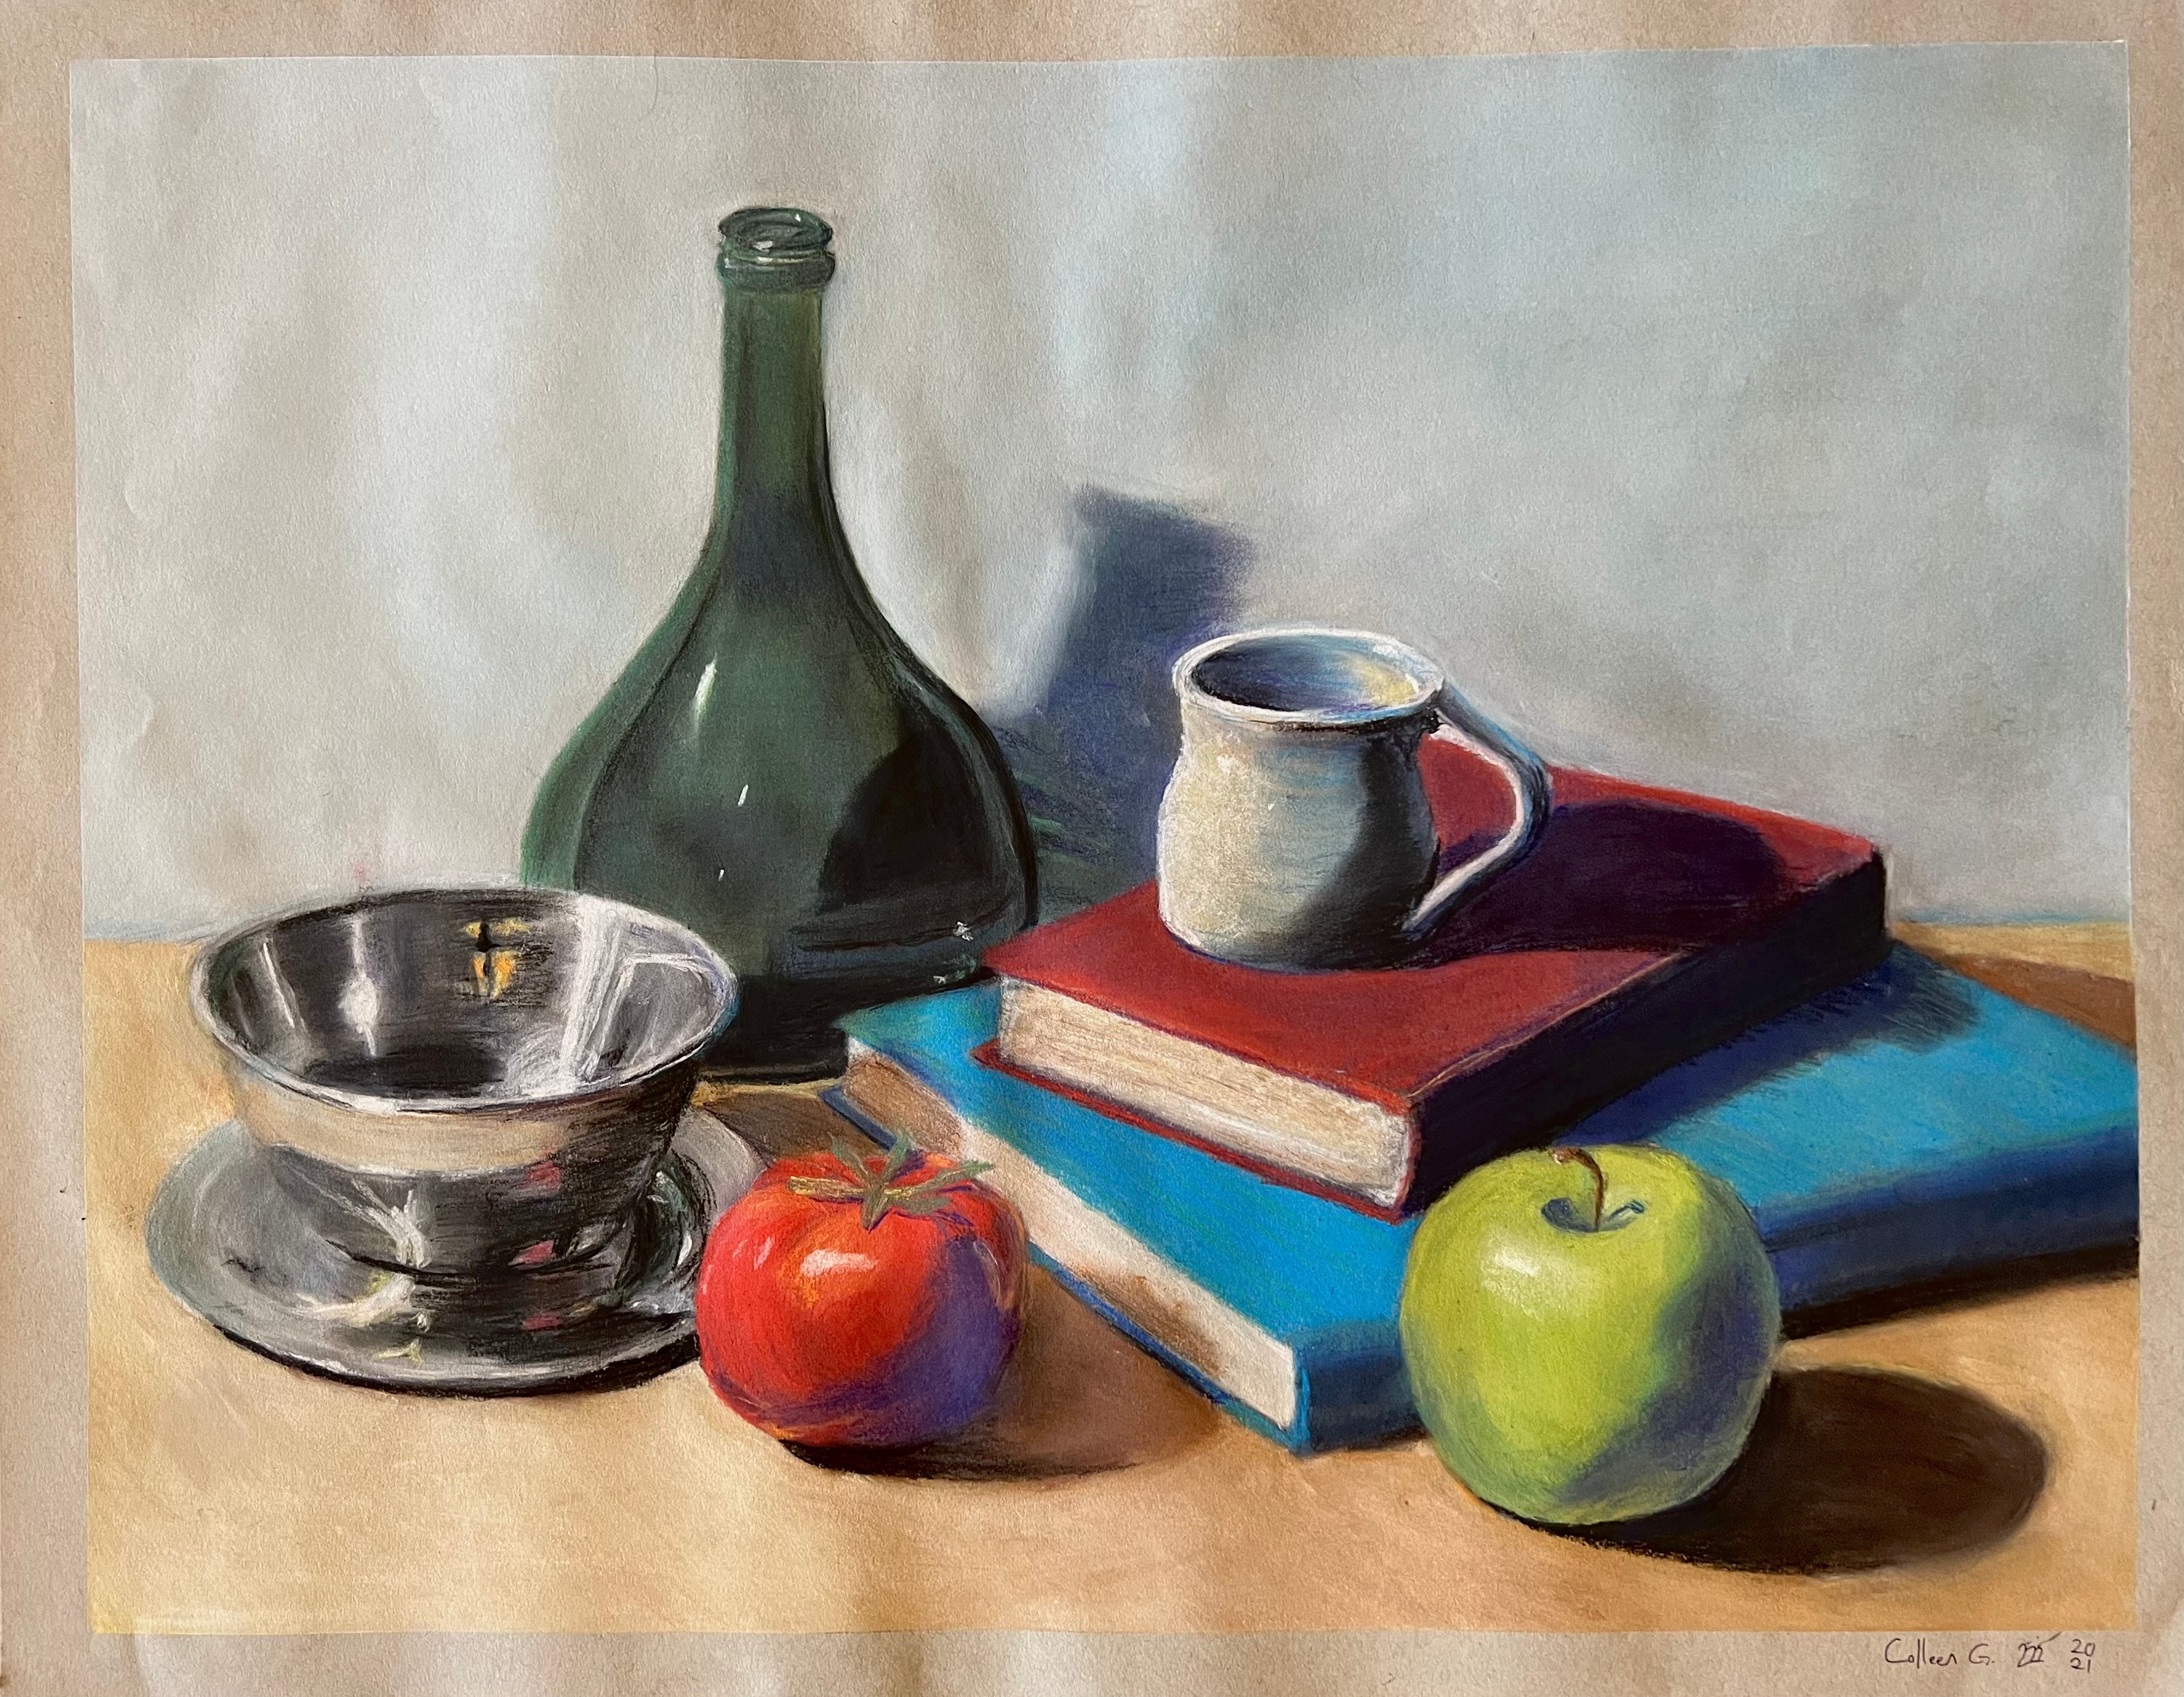 My final project! The only piece we did in color, my professor let us use colored conté crayons to do this still life. He wanted us to practice shiny things.
~14 hours.